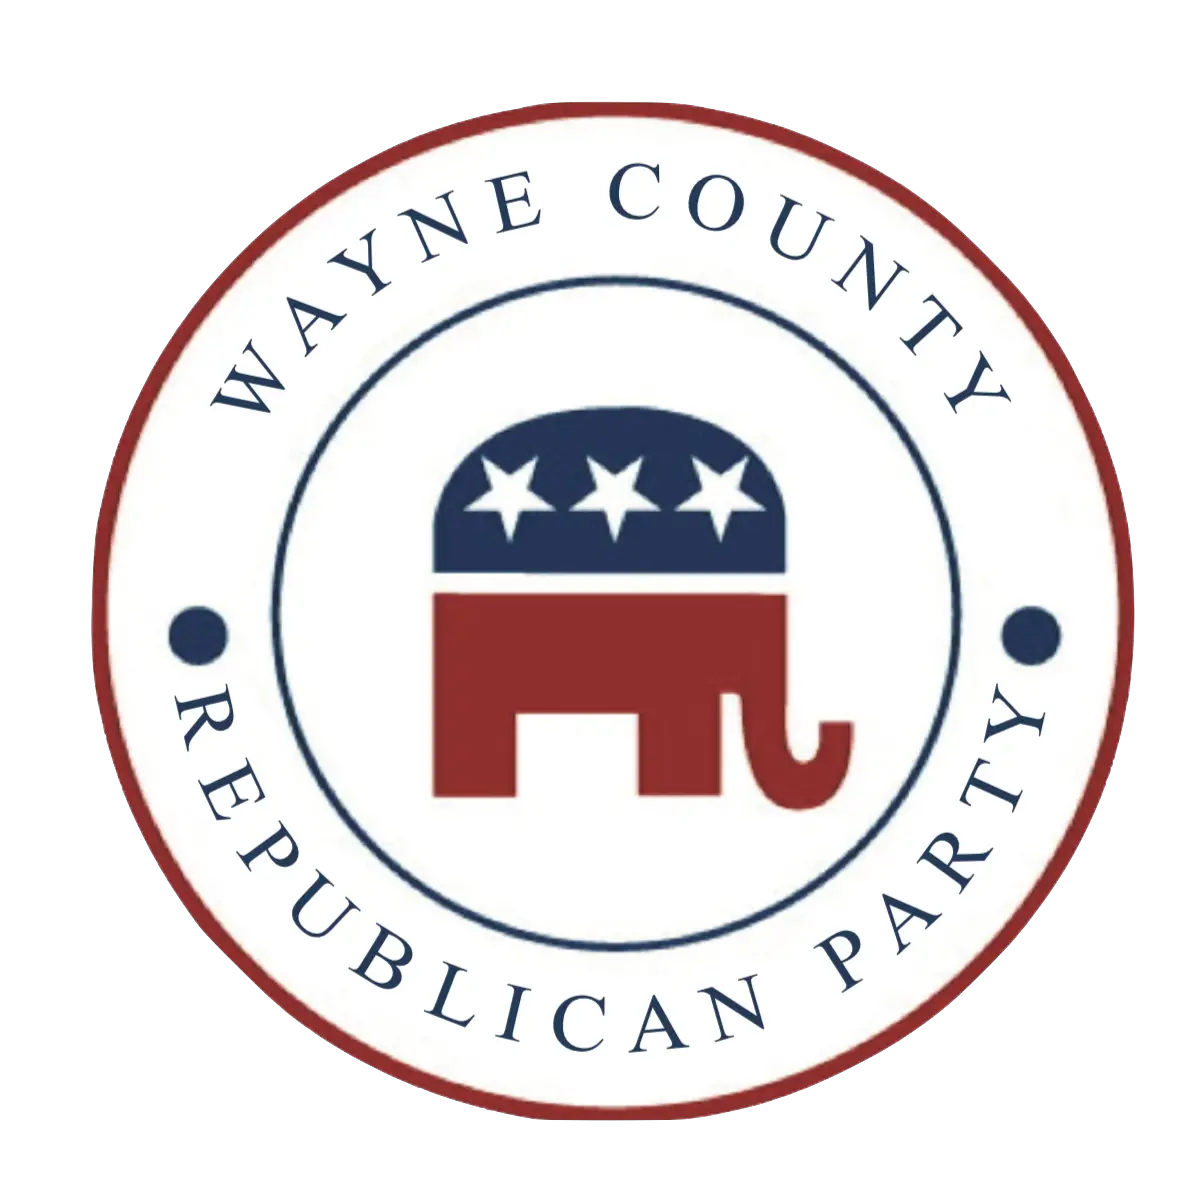 Donate to the Wayne County Republican Party!